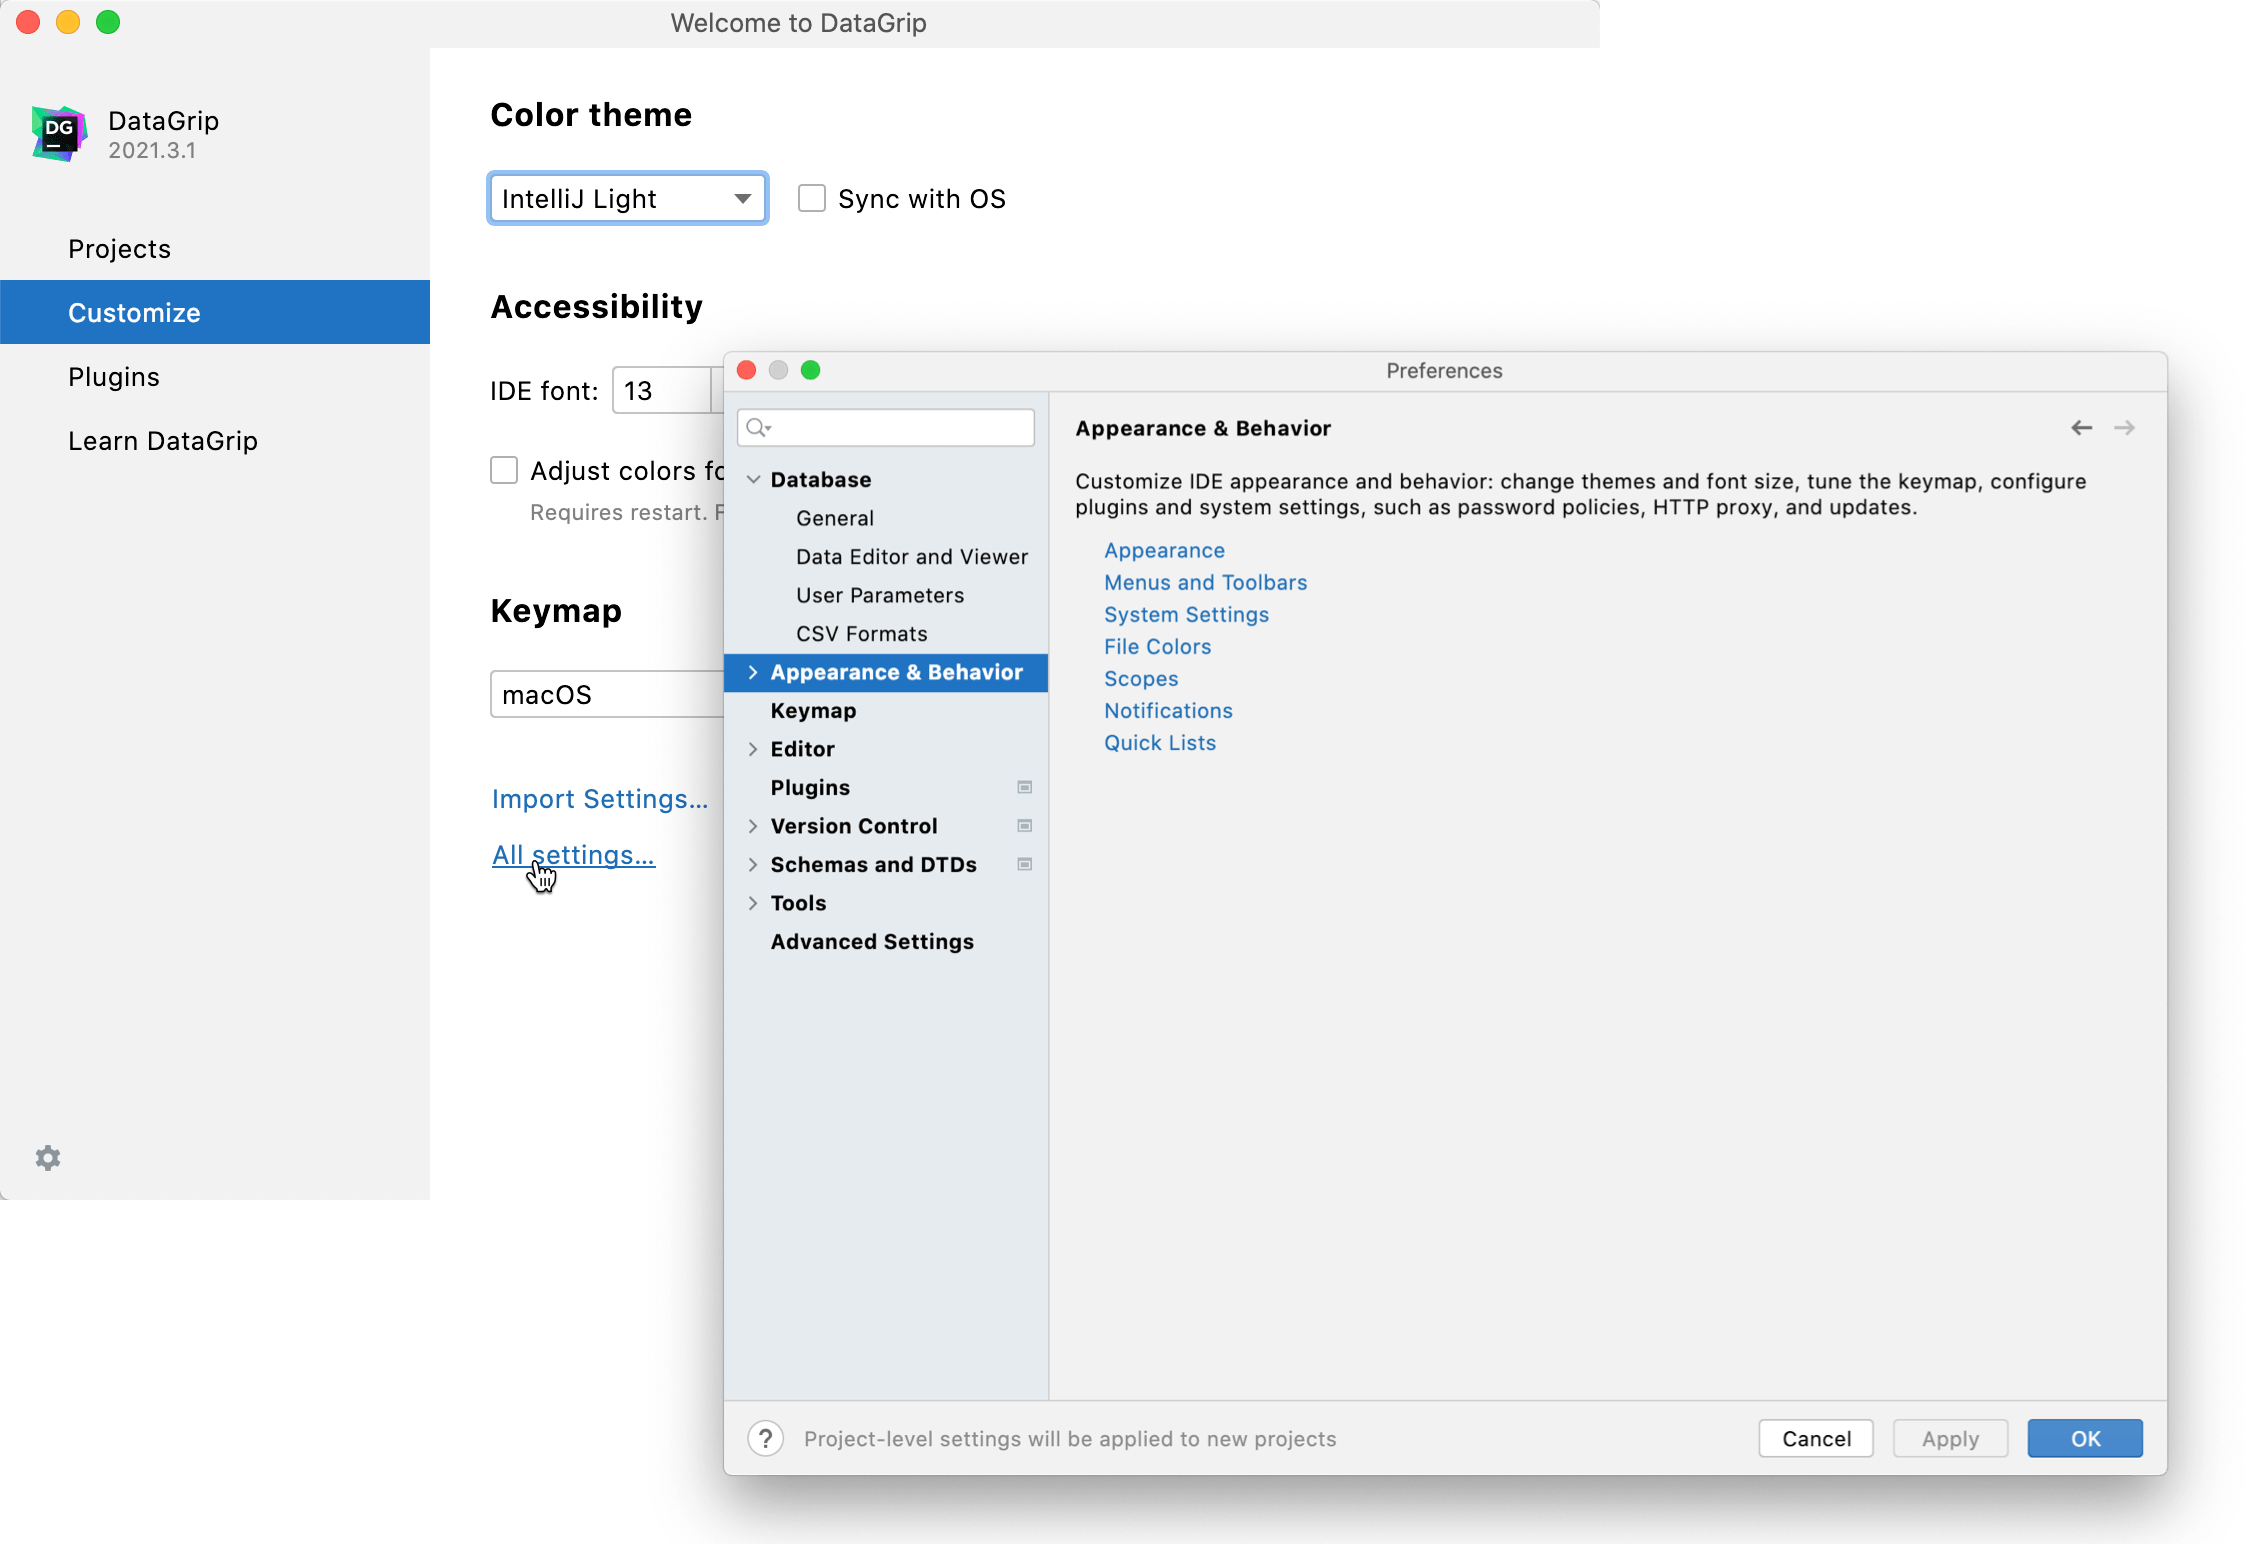 Configuring new default settings for projects